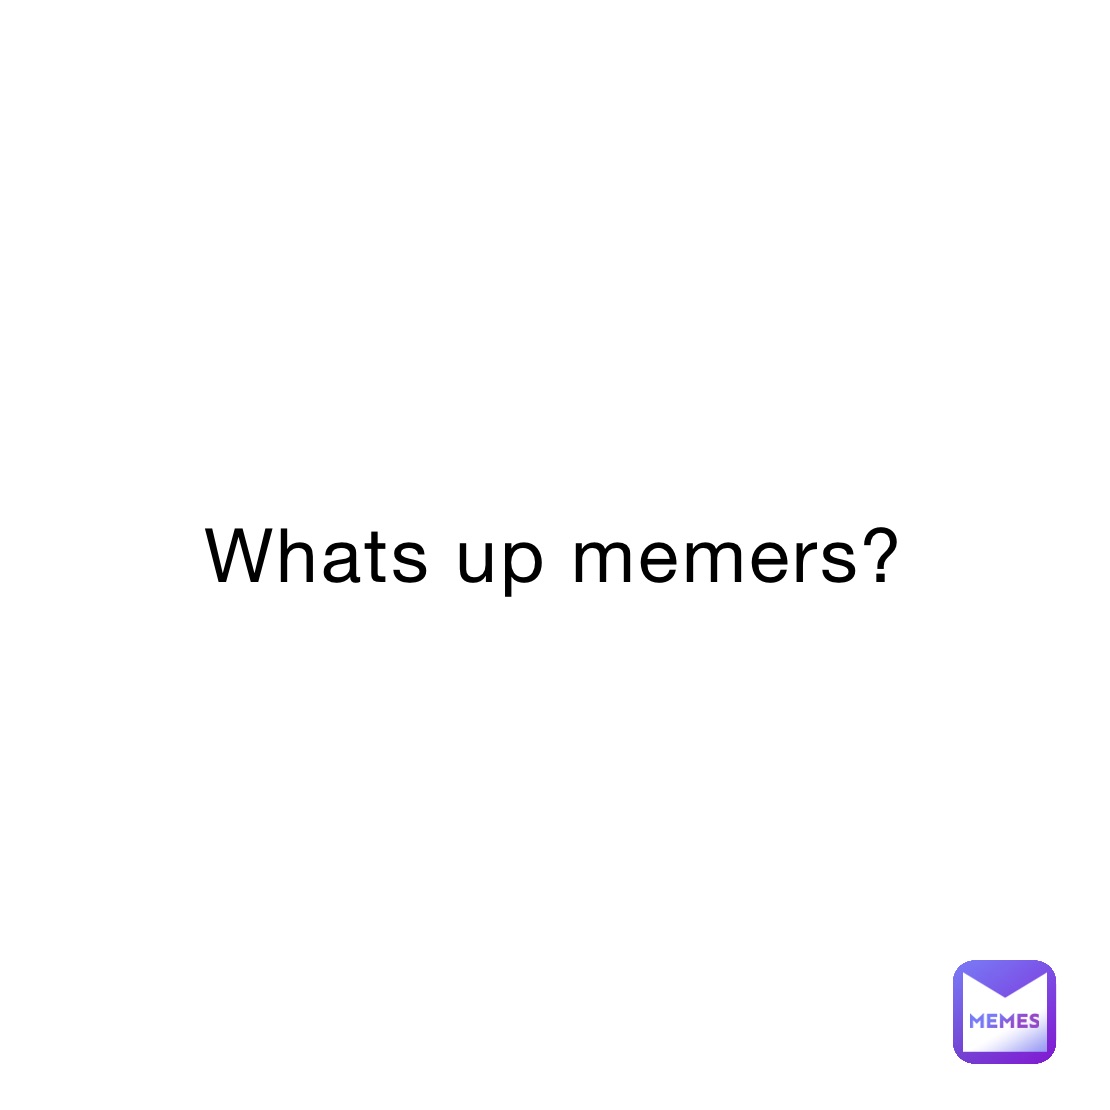 Whats up memers?